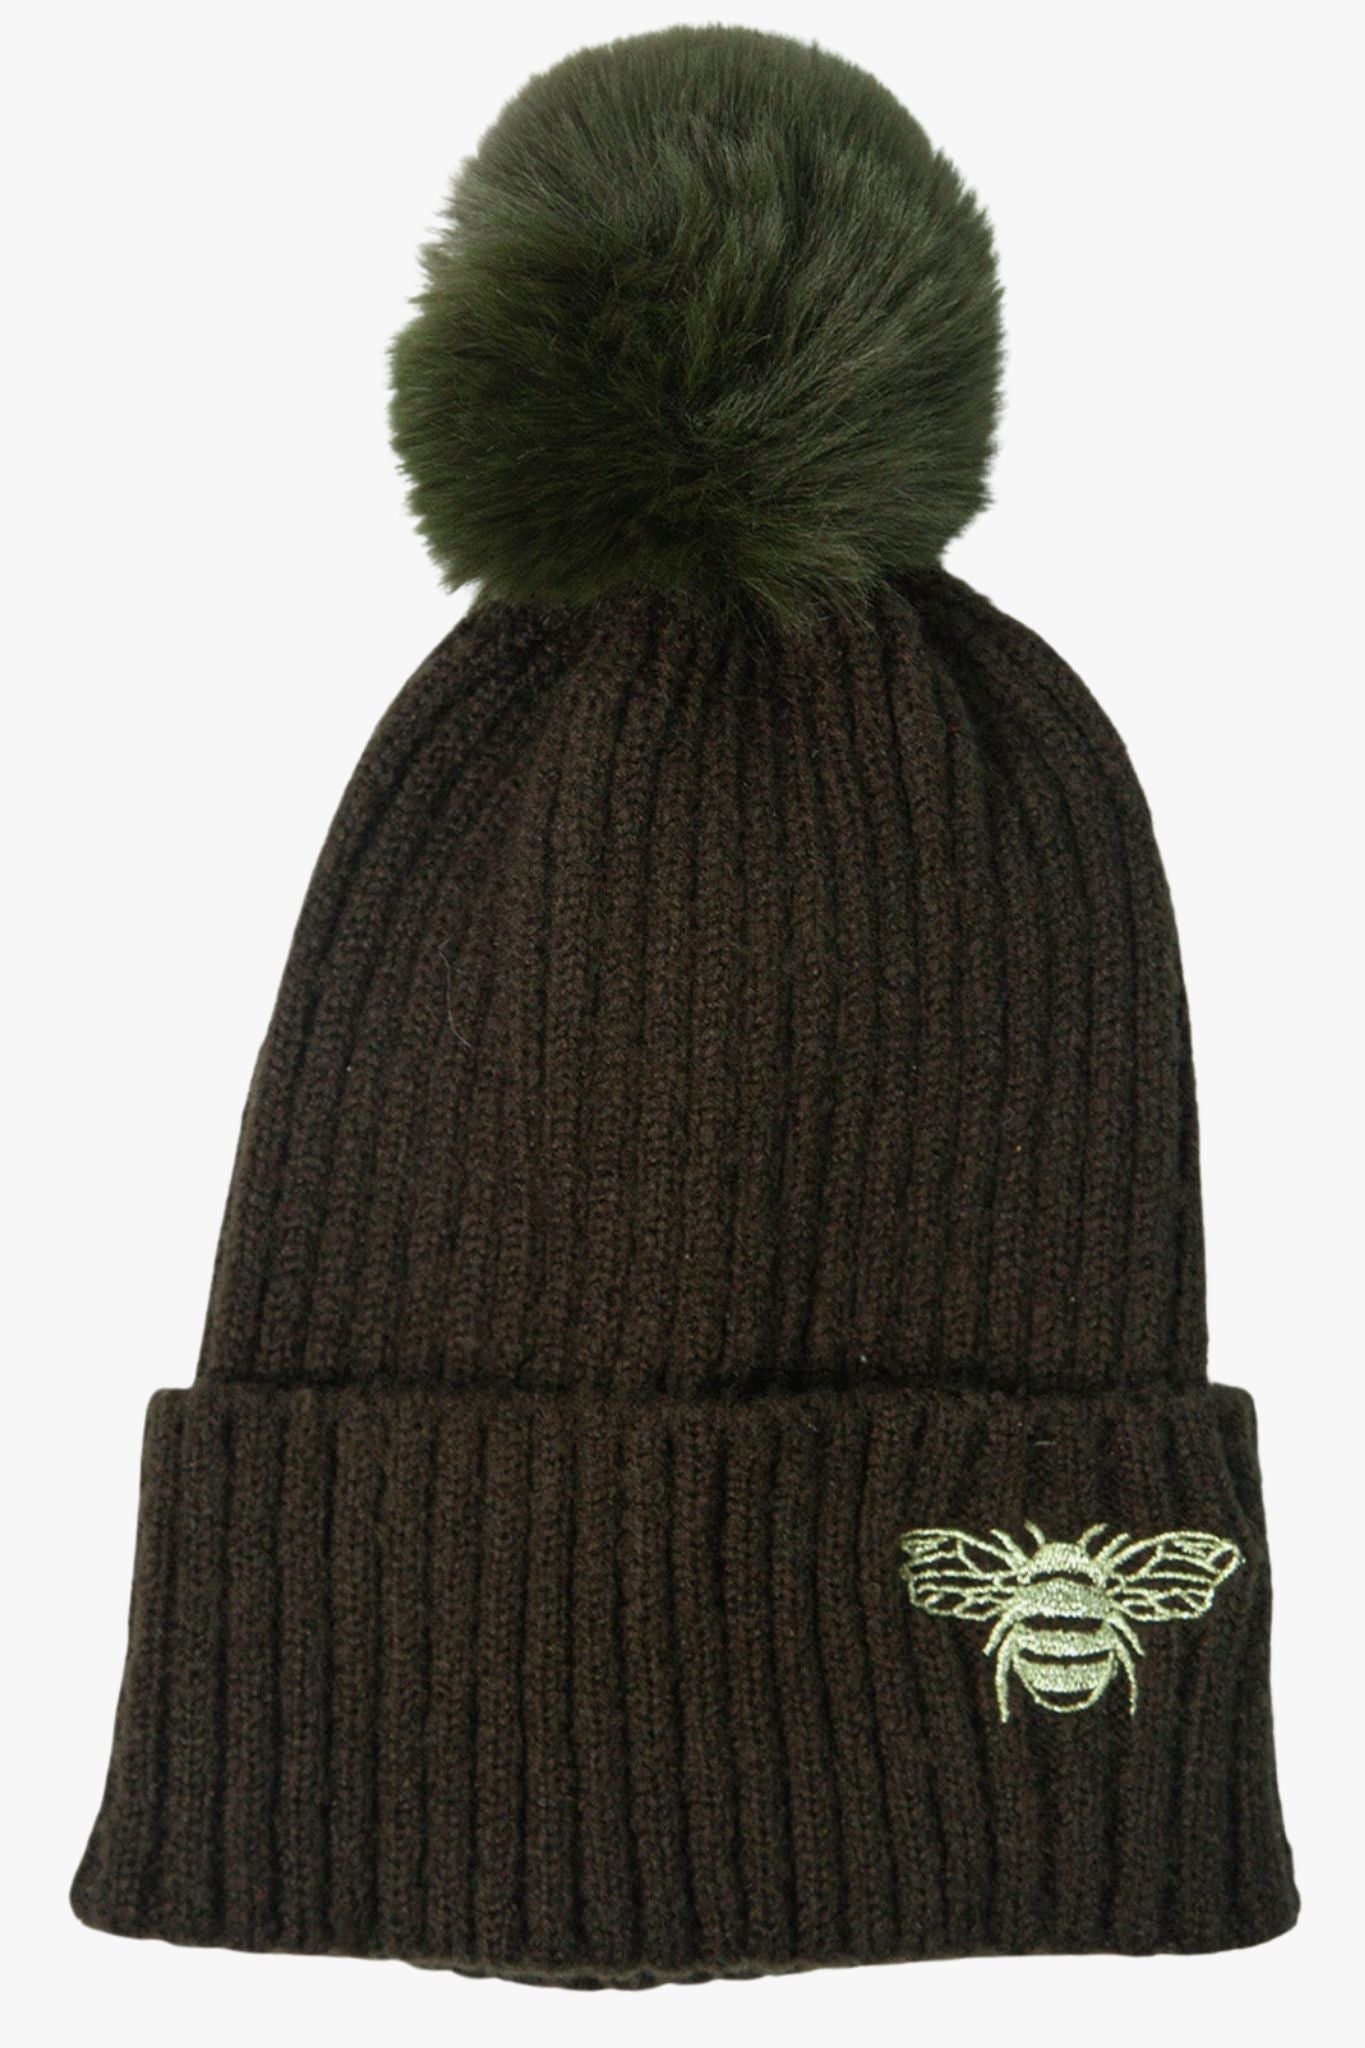 khaki green winter hat with a pom pom and an embroidered gold bumble bee on the front